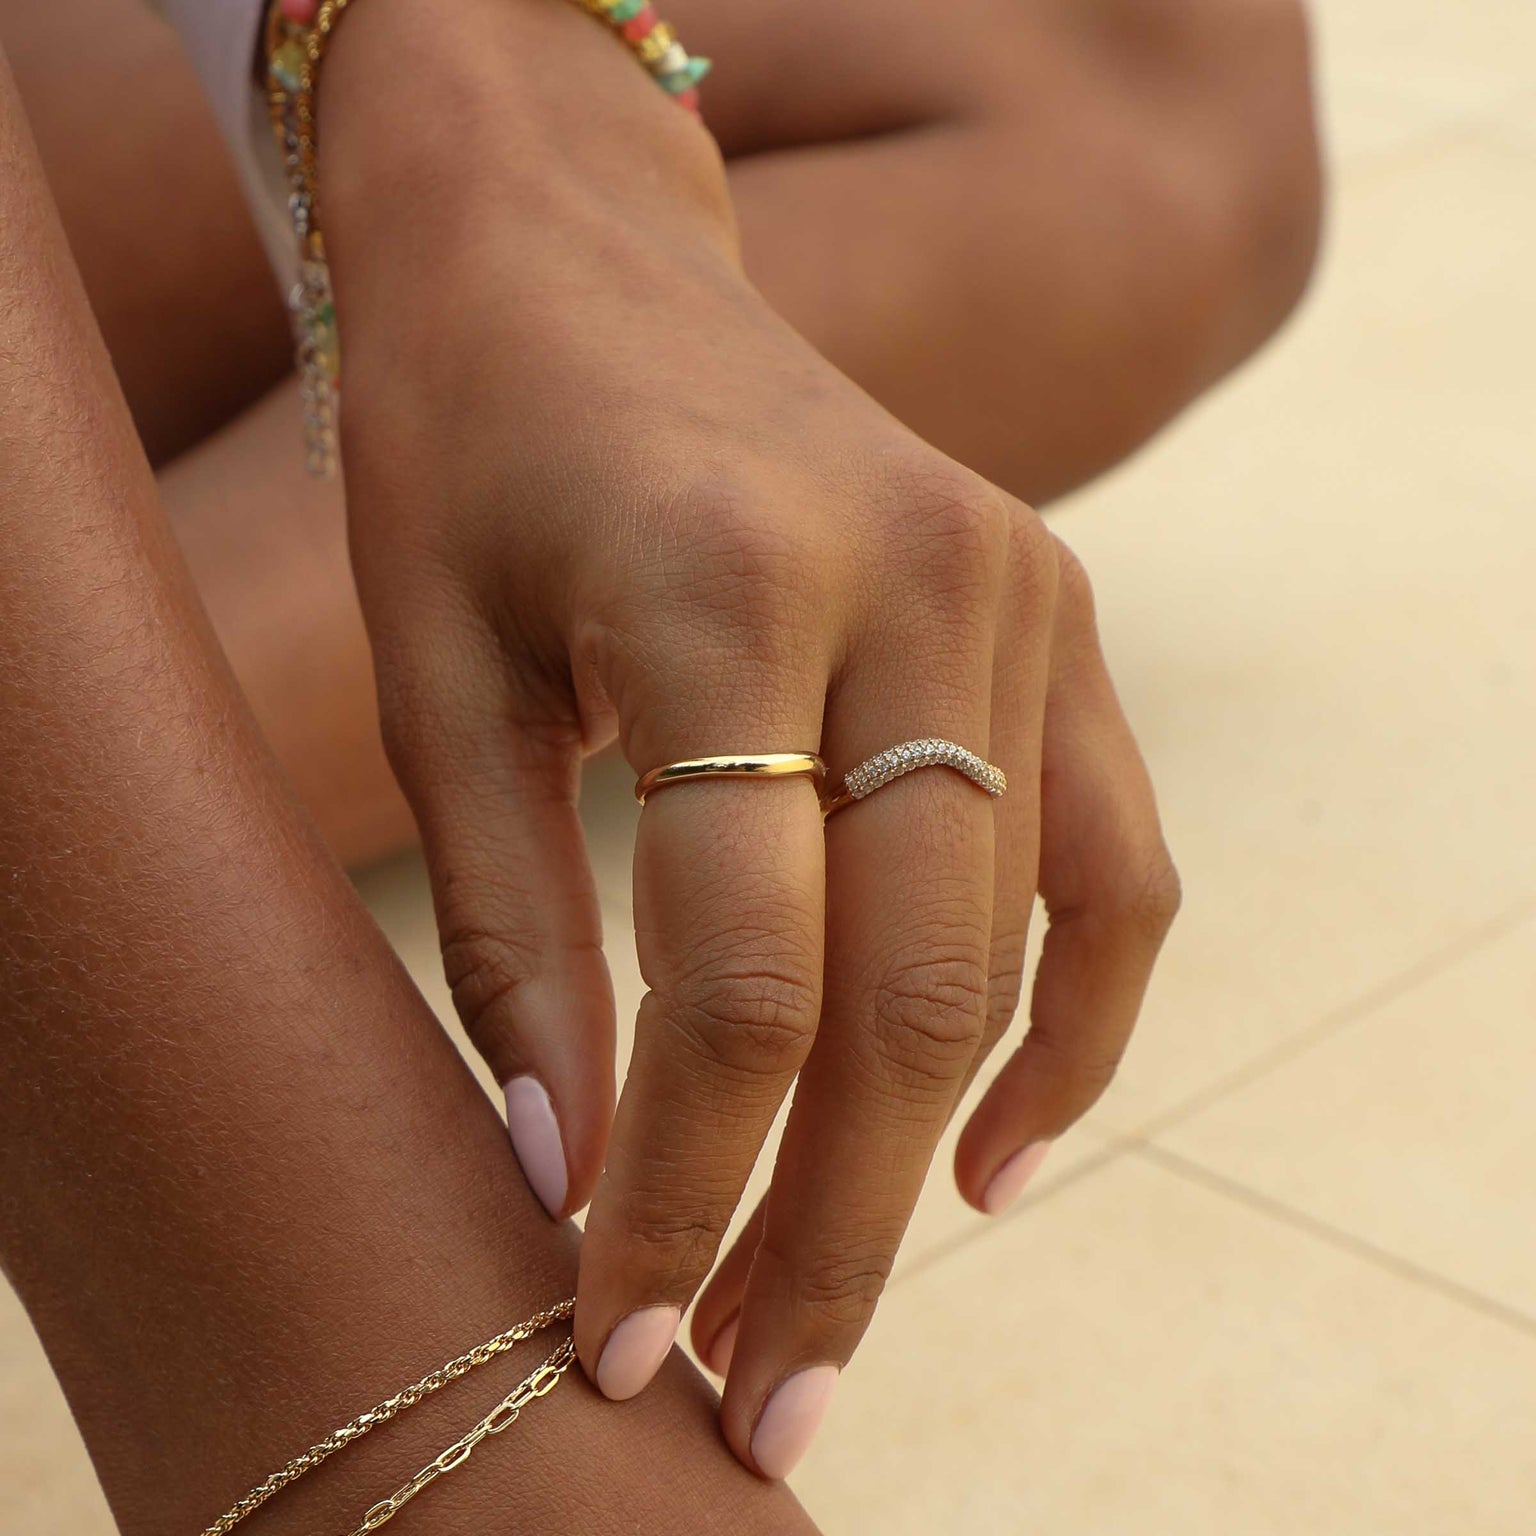 Wave Crystal Ring in Gold worn